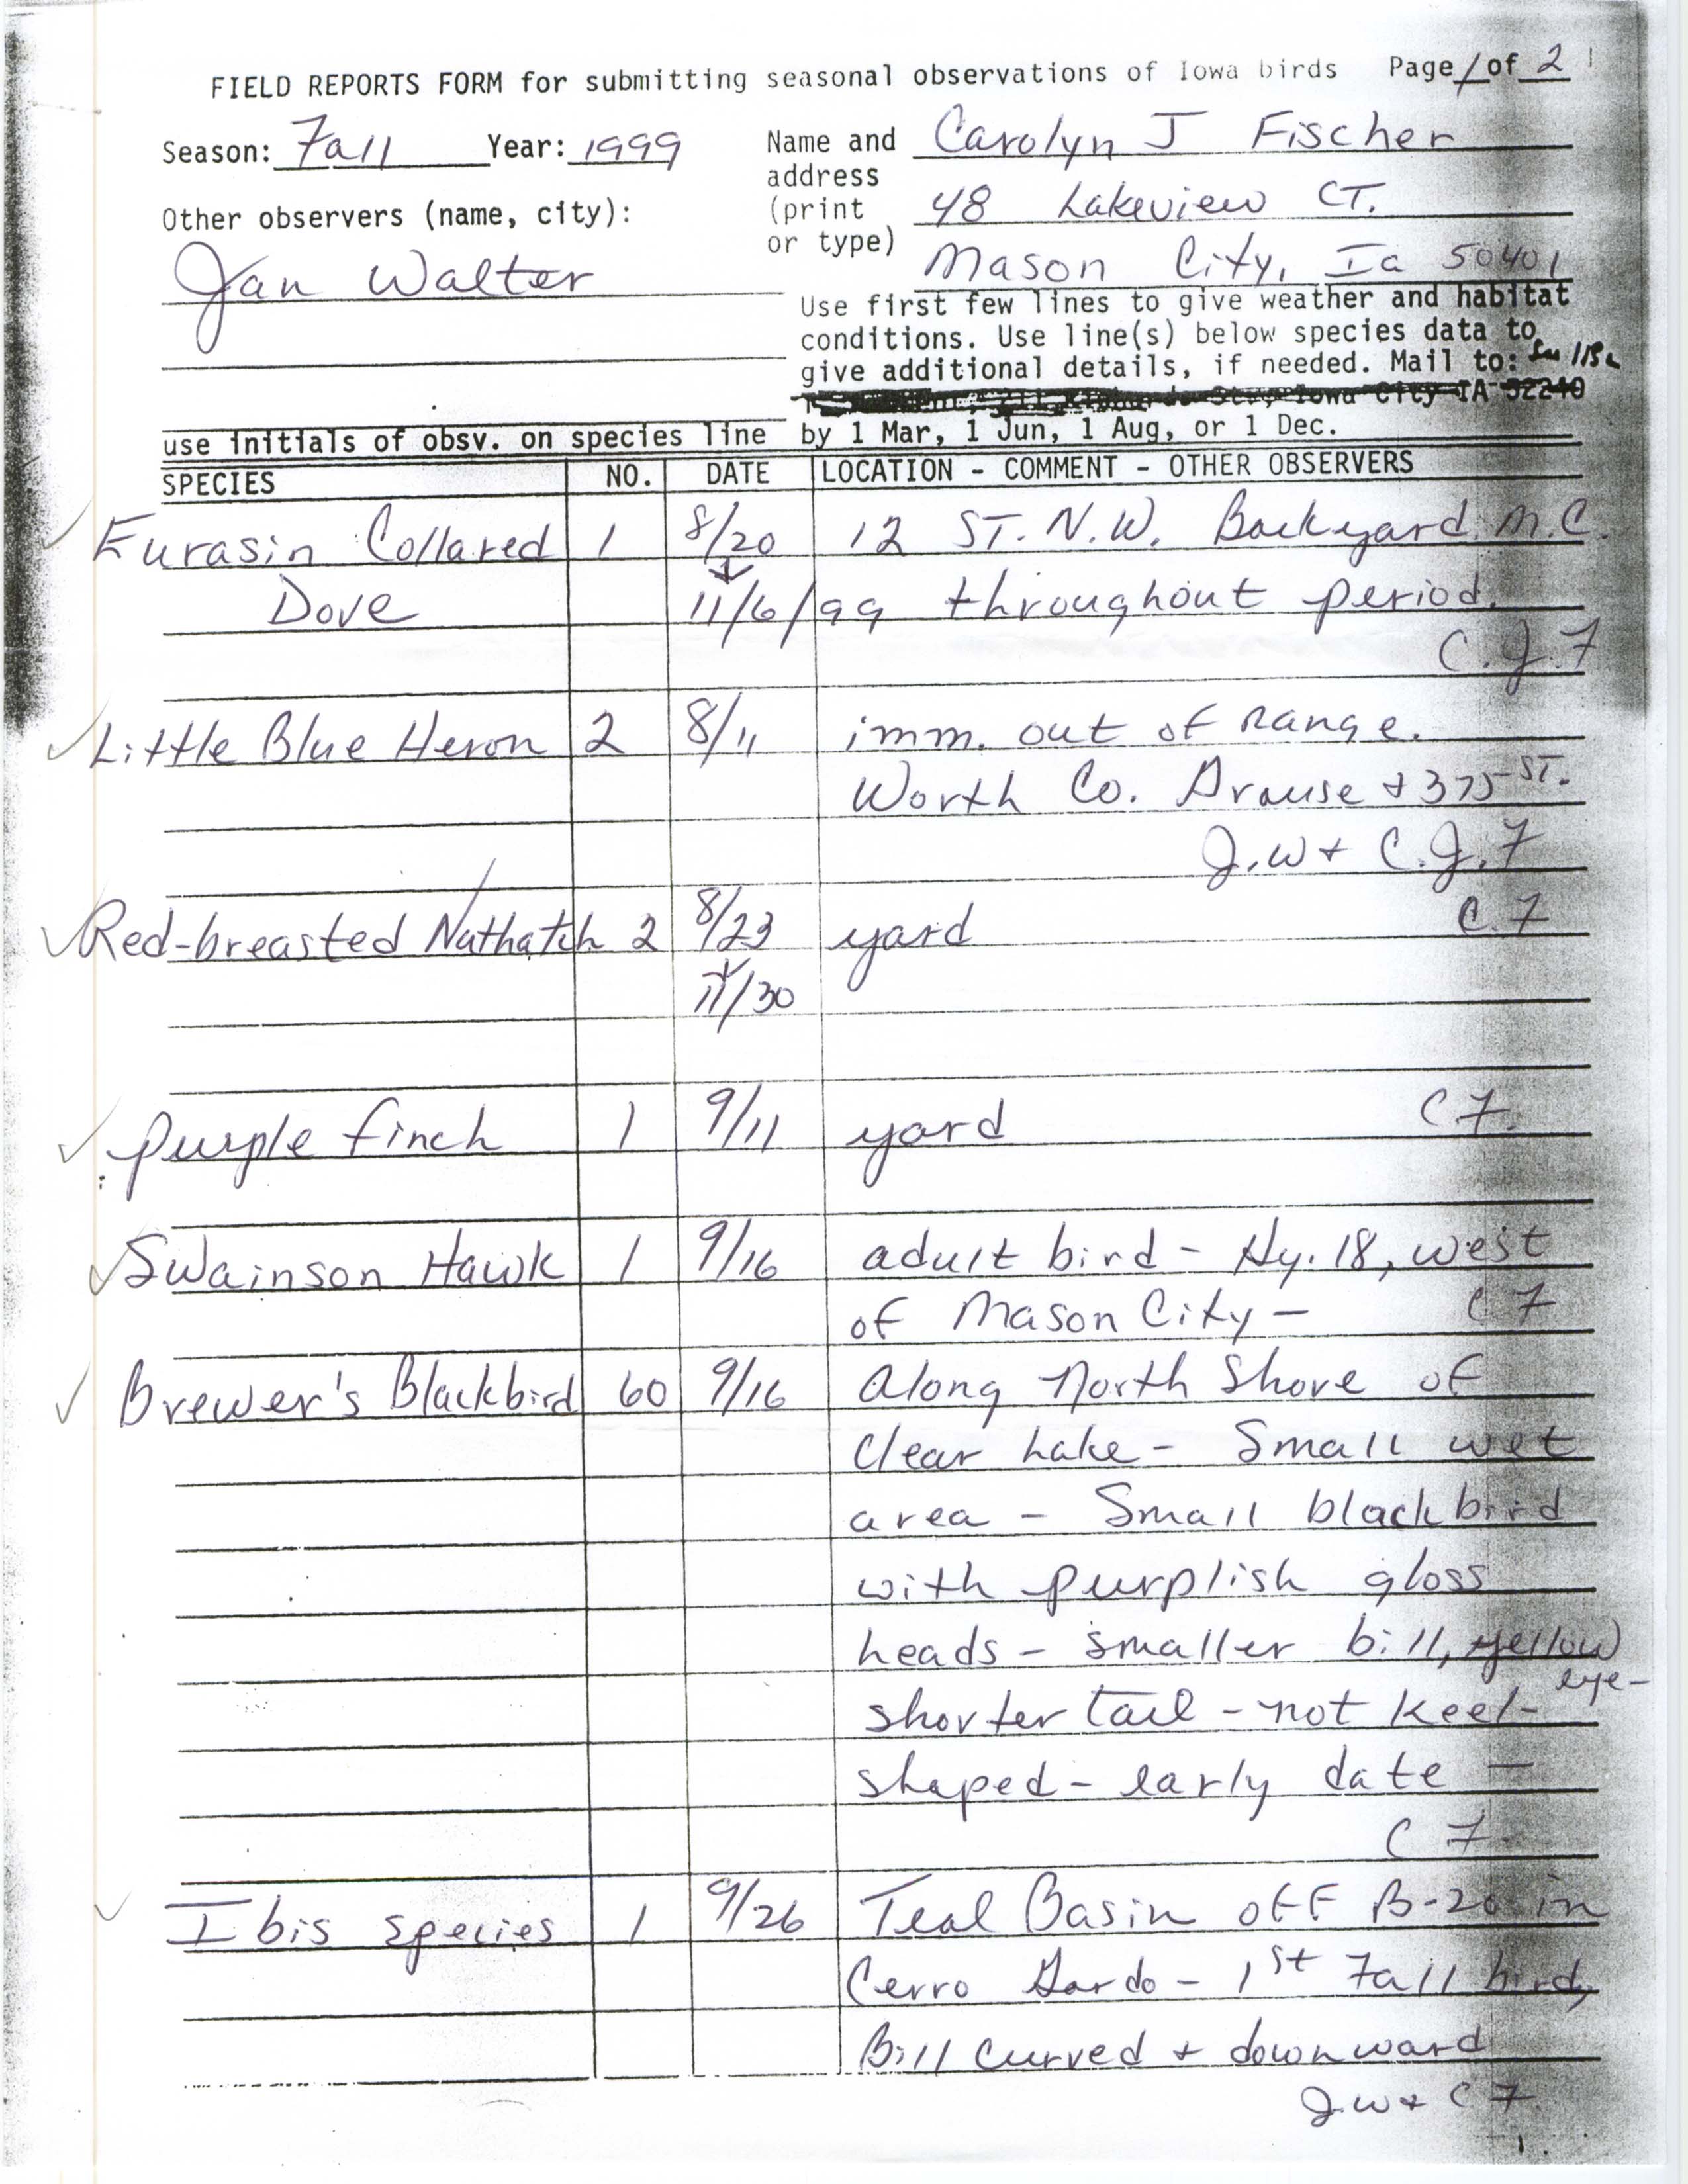 Field reports form for submitting seasonal observations of Iowa birds, fall 1999, Carolyn Fischer